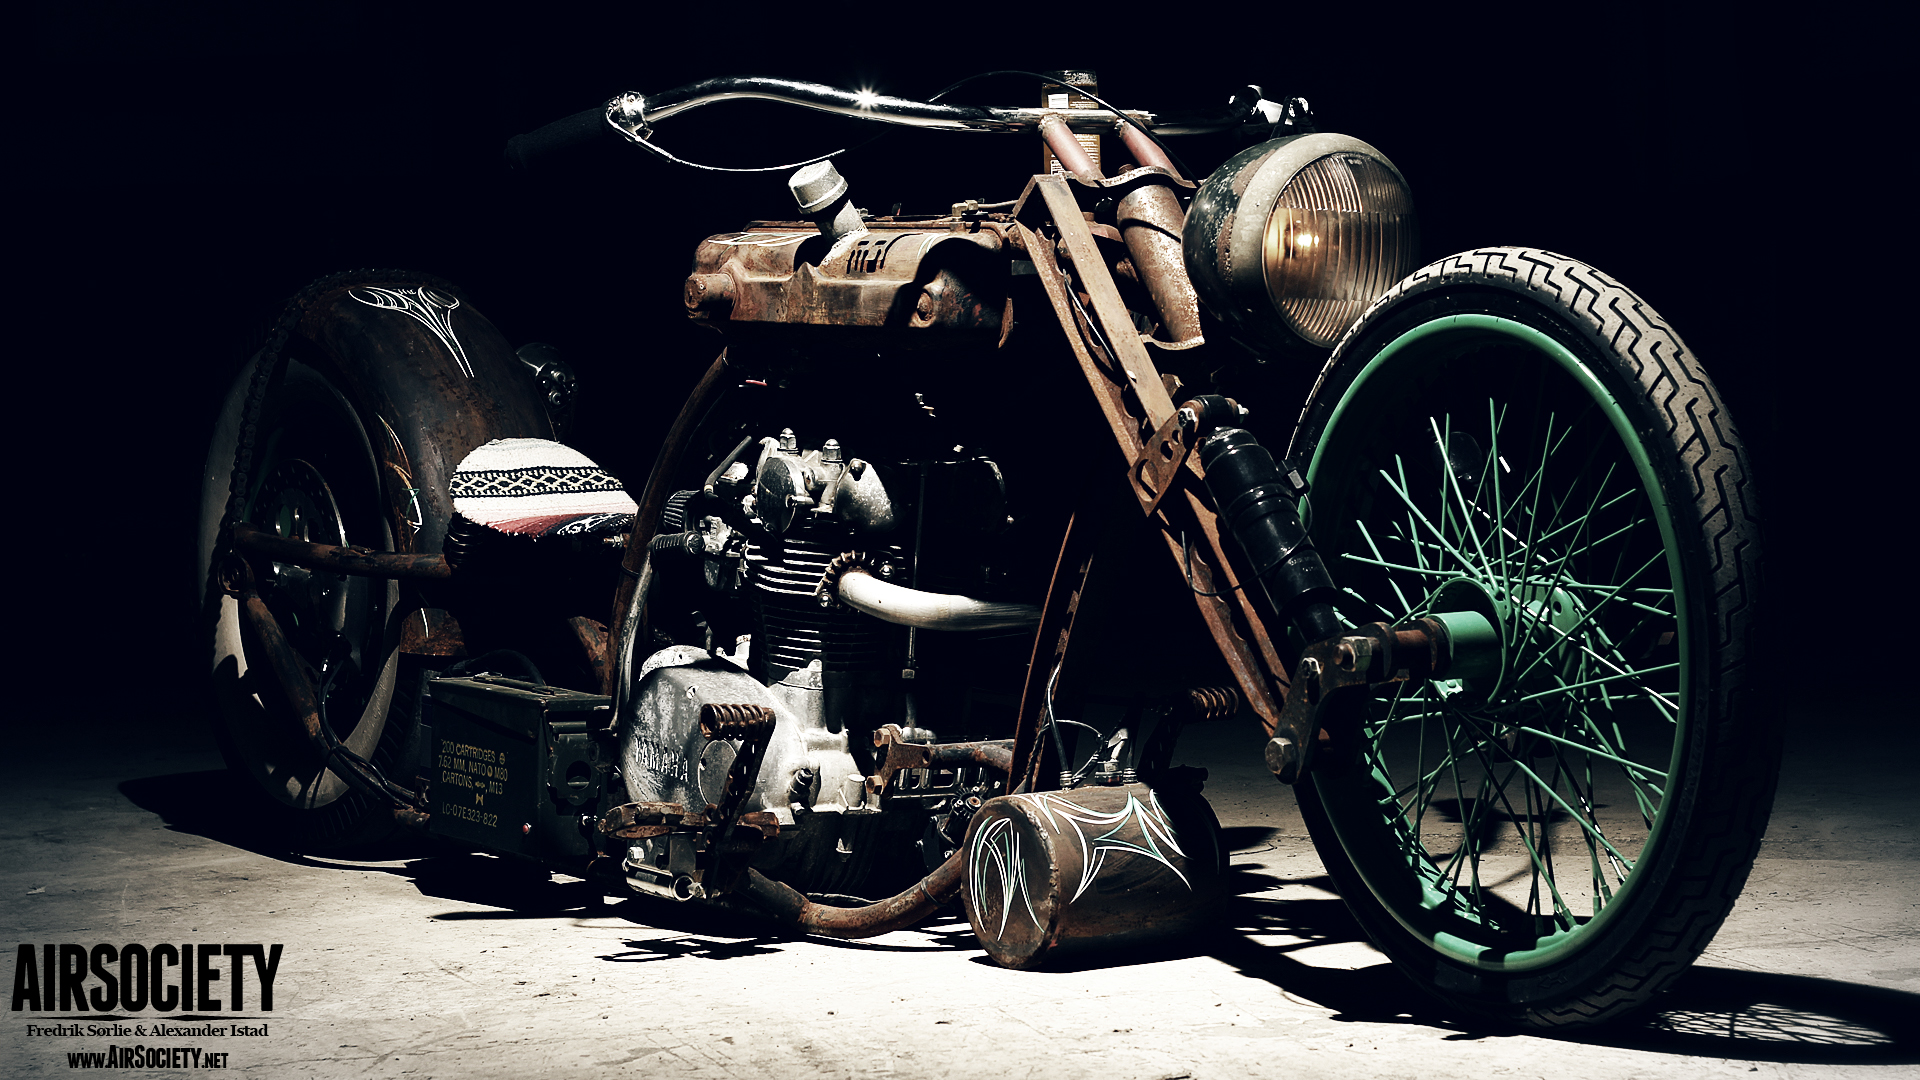 47 Cool Bike Wallpapers/Backgrounds In HD For Free Download